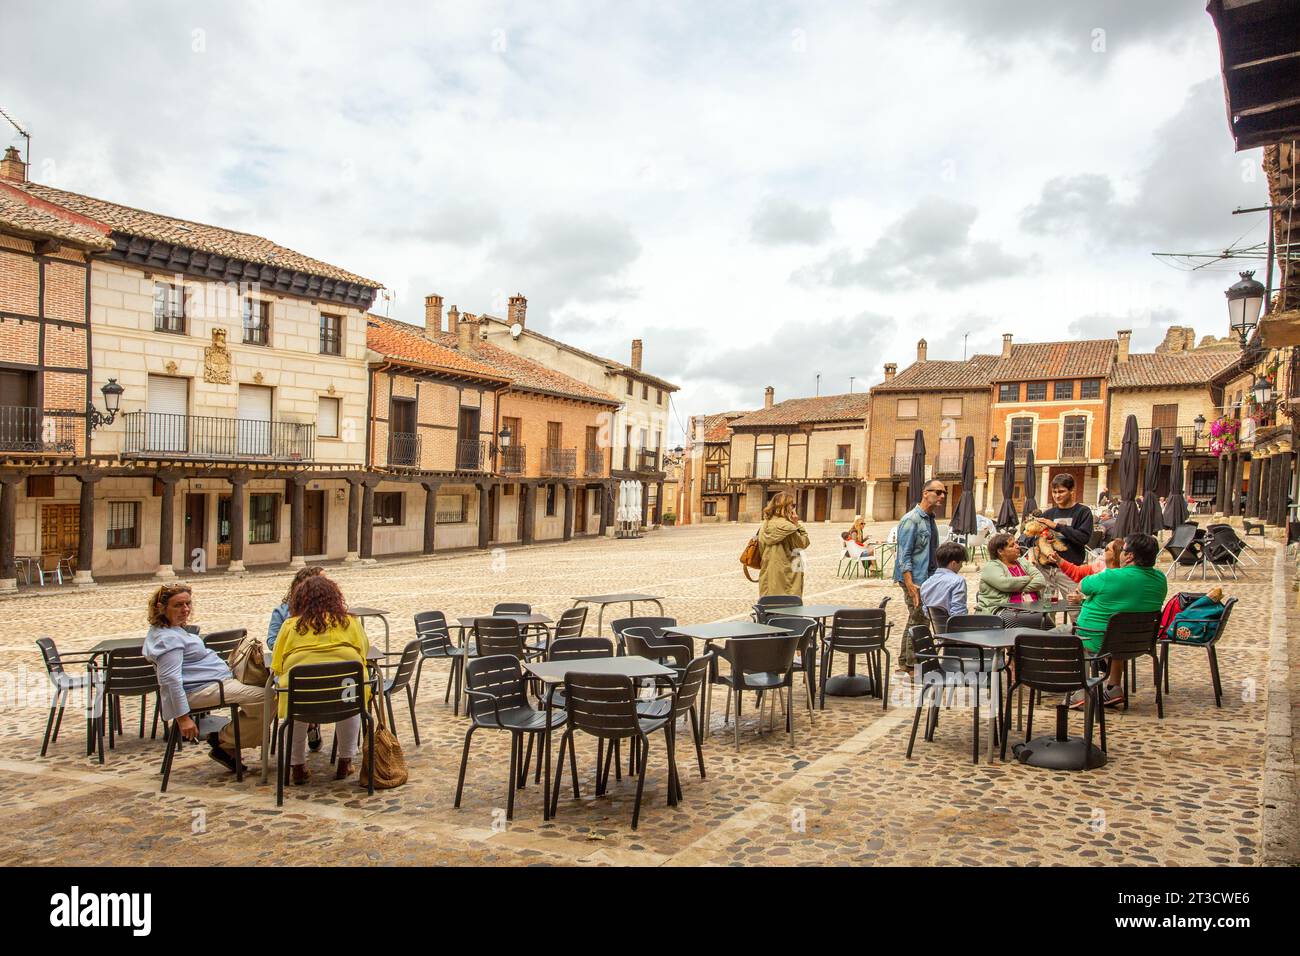 People outside in the Plaza mayor in the Spanish city of Saldana North Western Spain Stock Photo